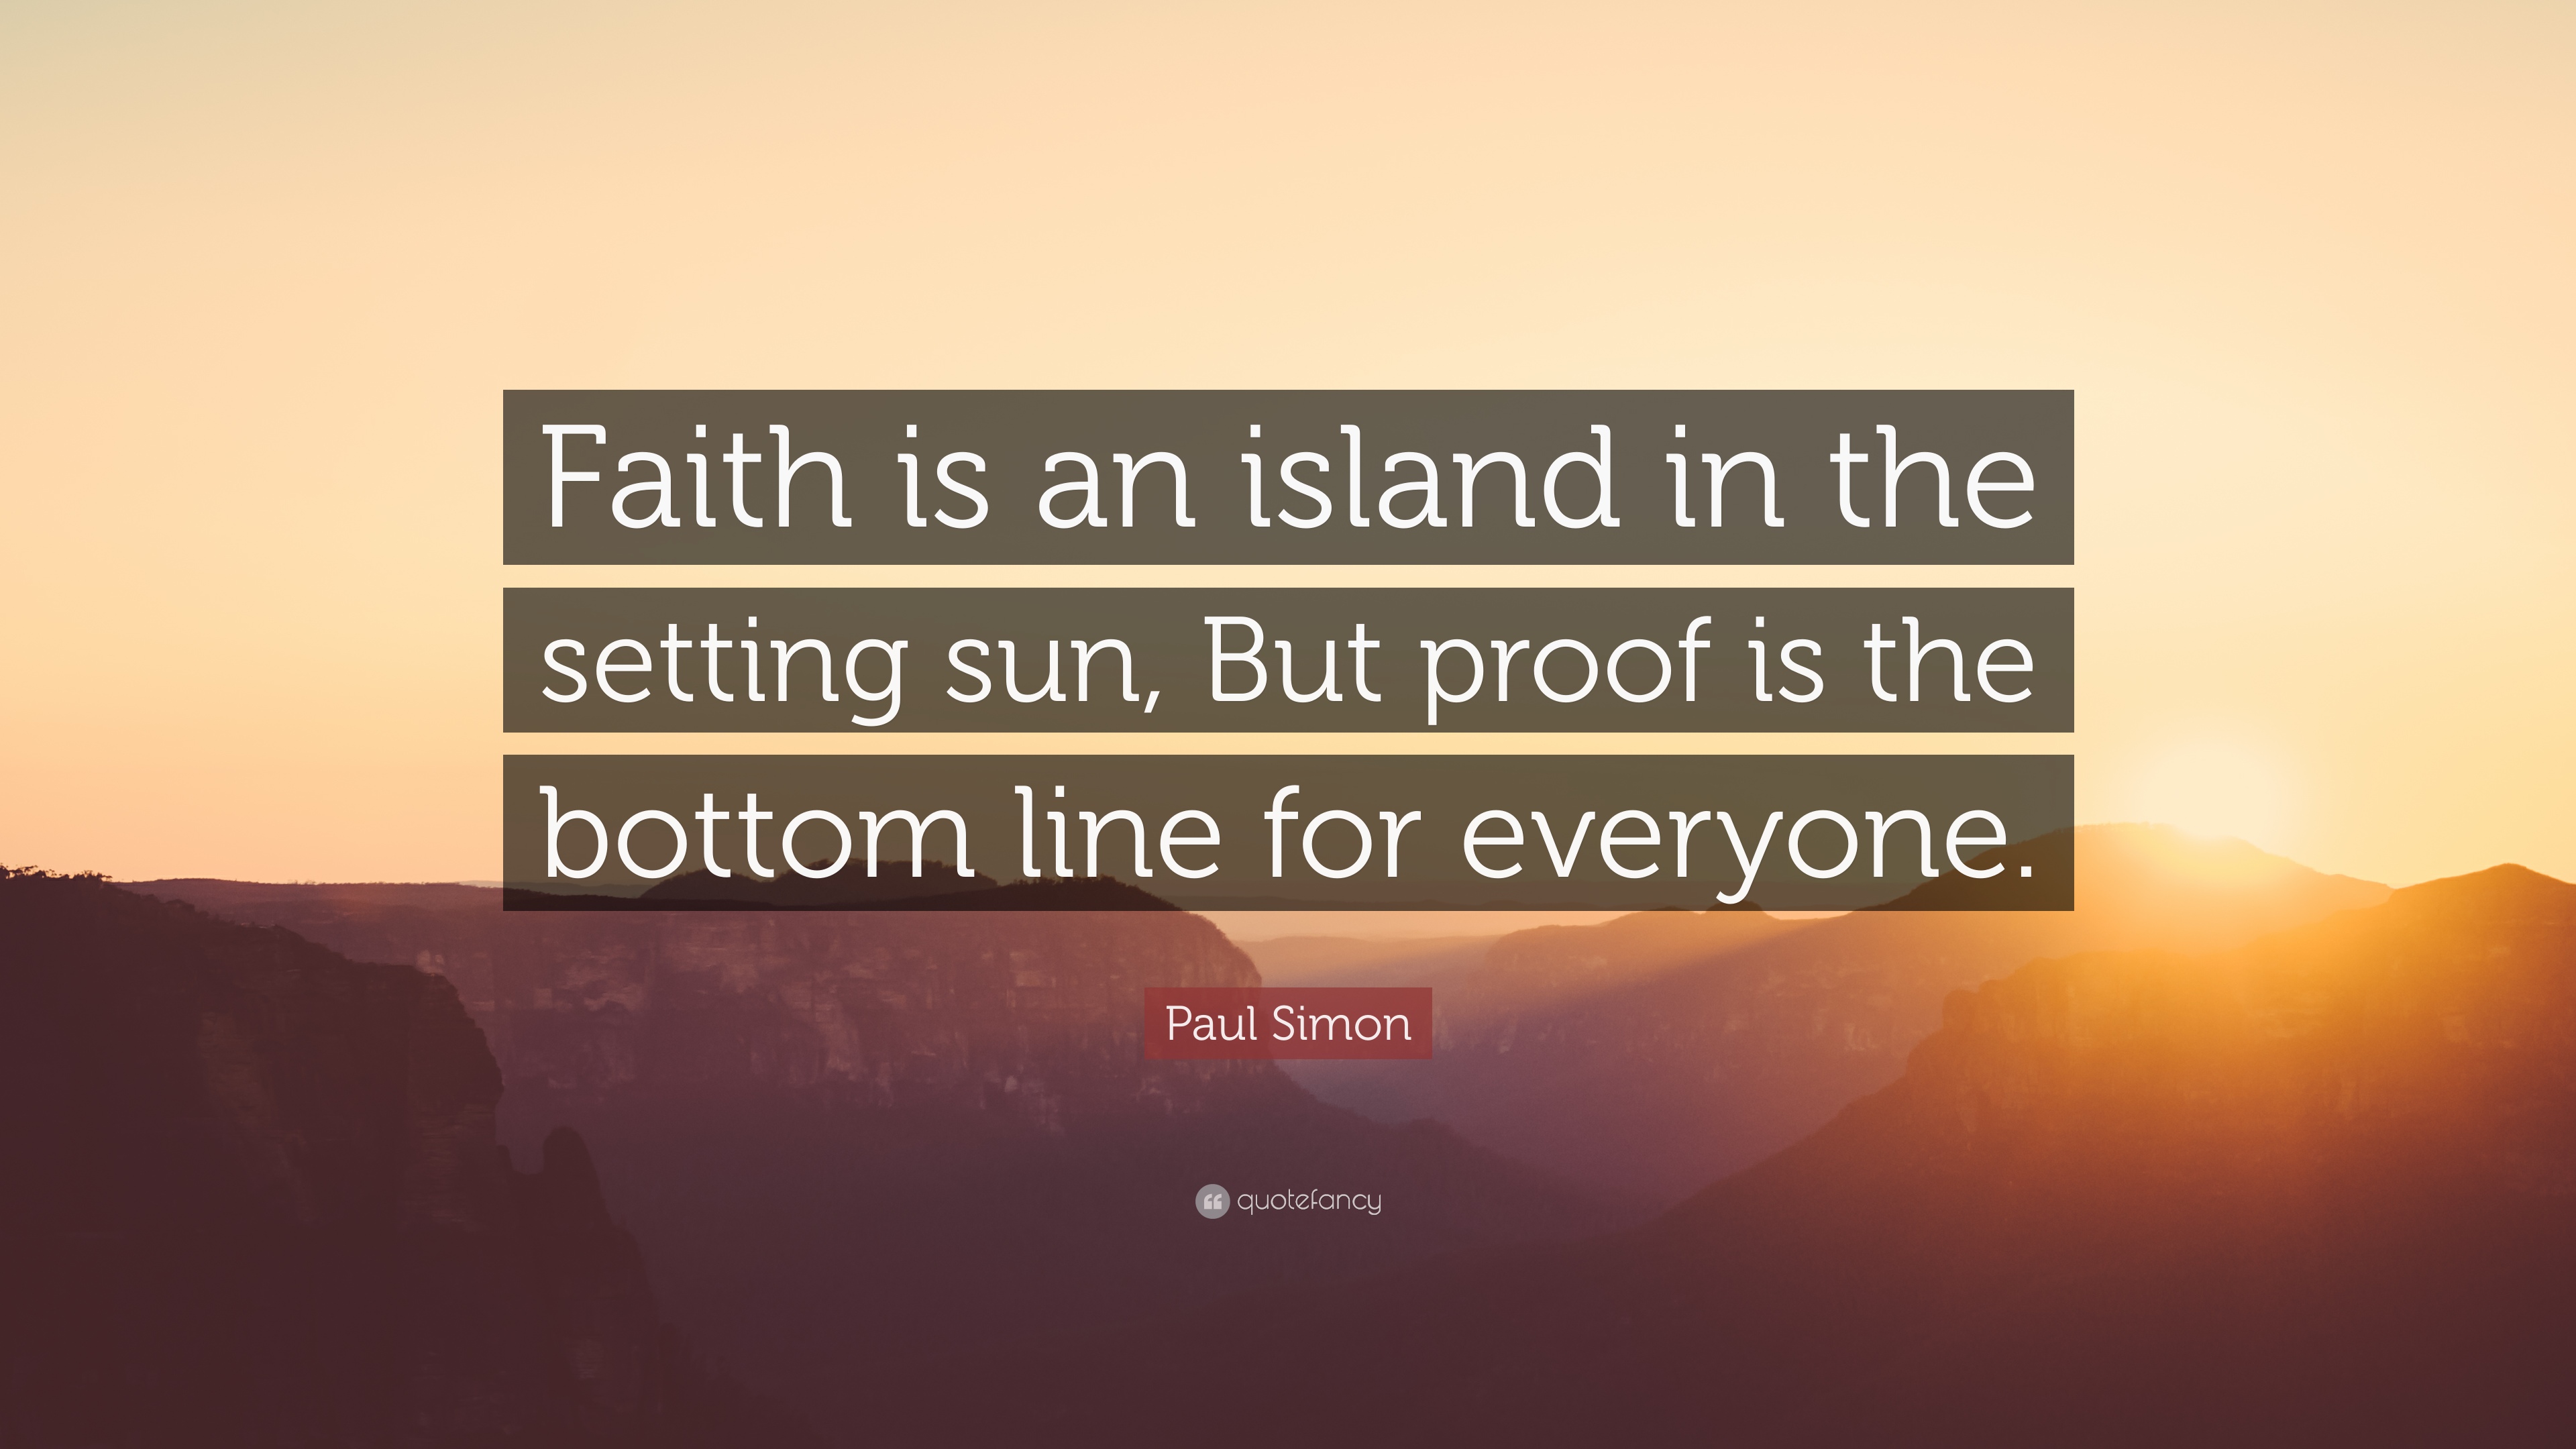 Paul Simon Quote: “Faith is an island in the setting sun, But proof ...